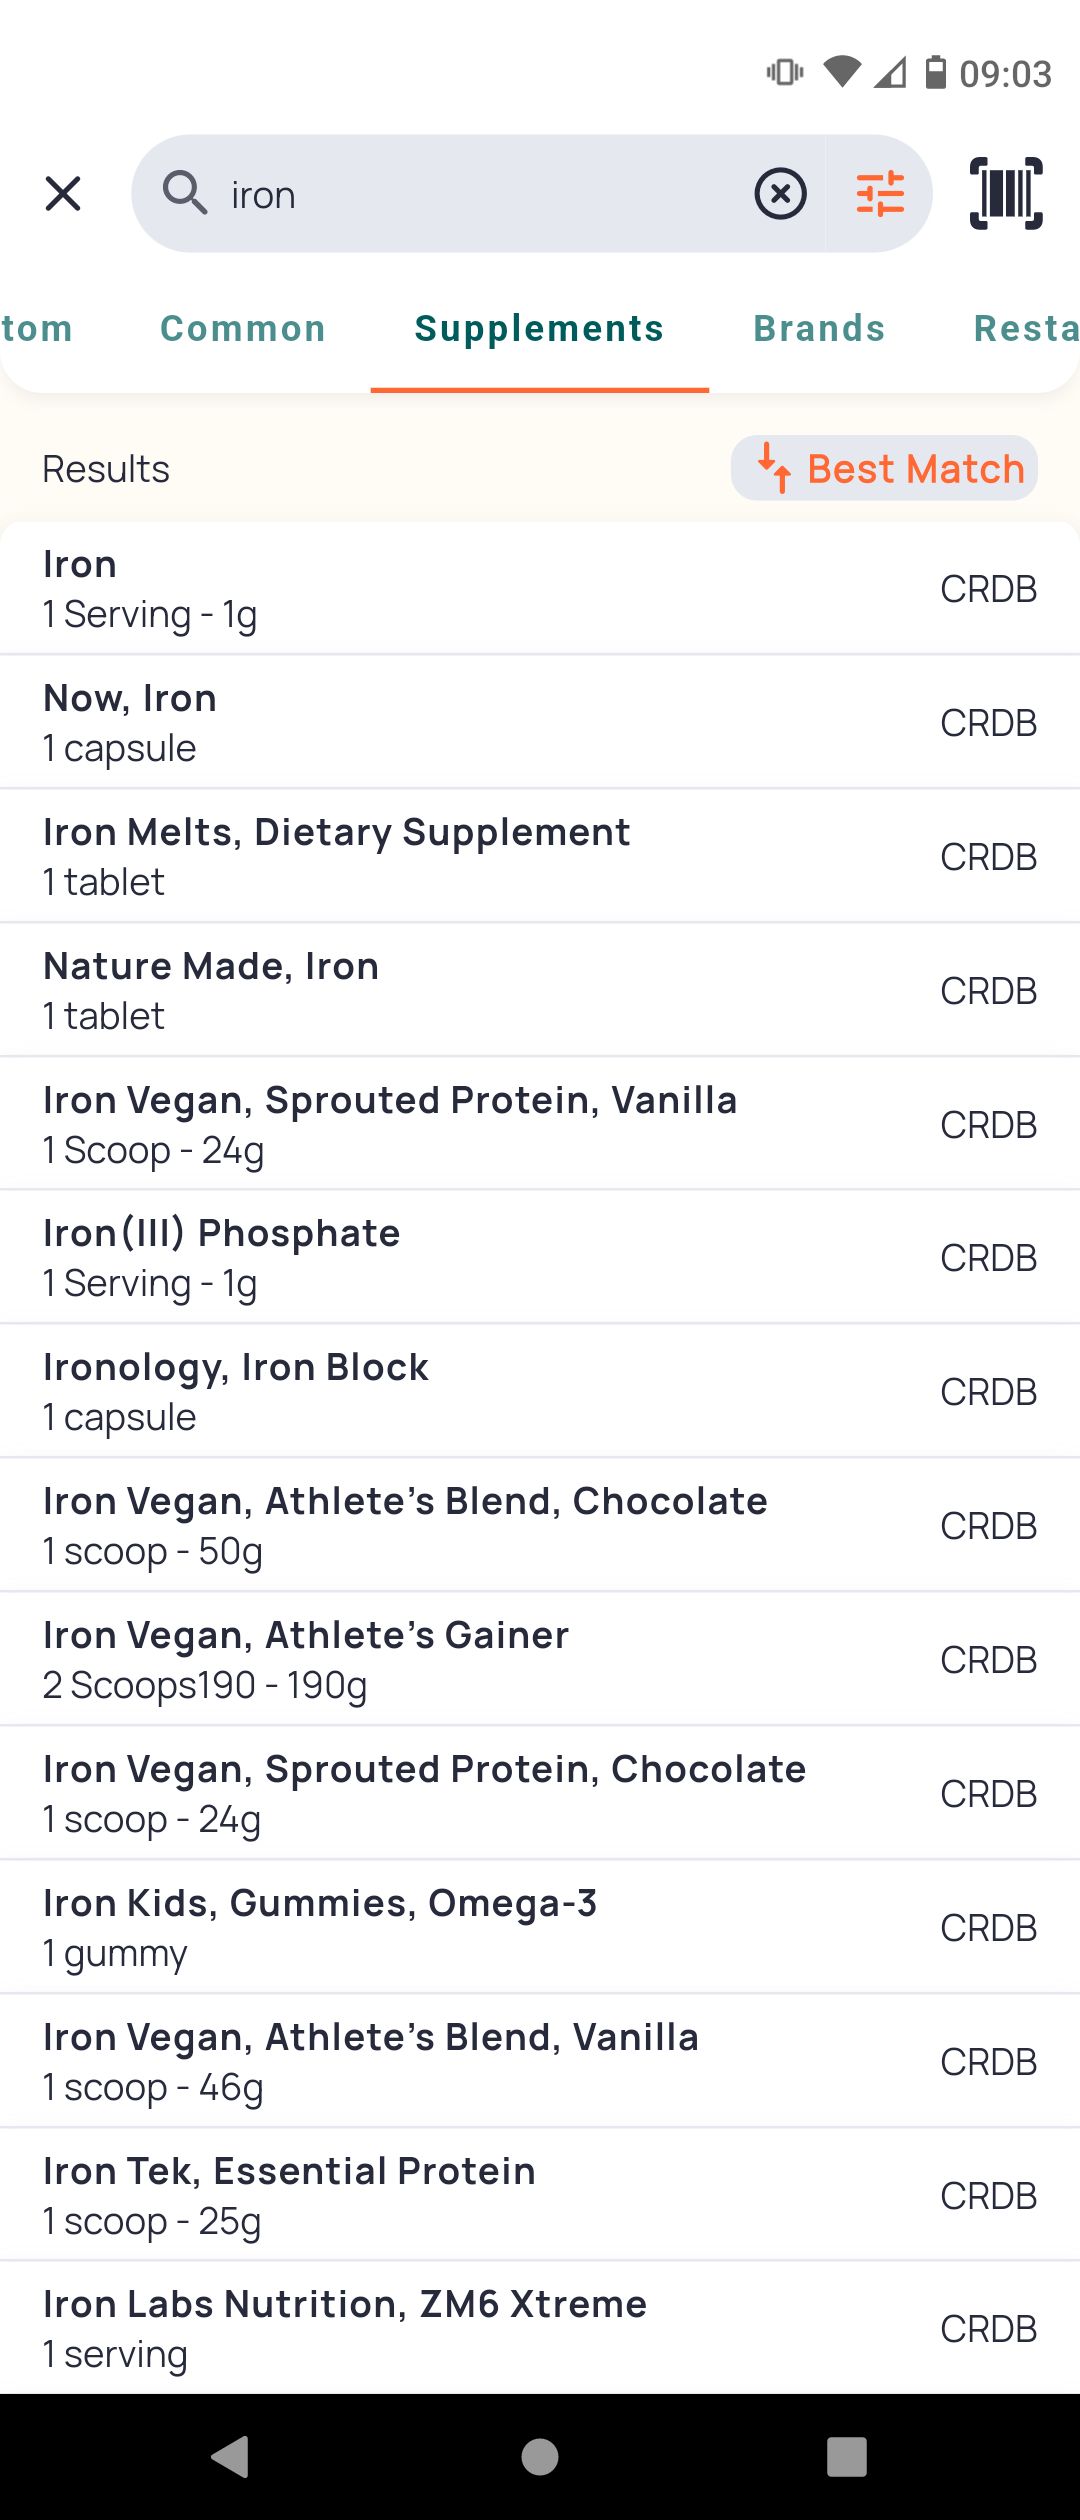 Iron Options in Cronometer Supplements